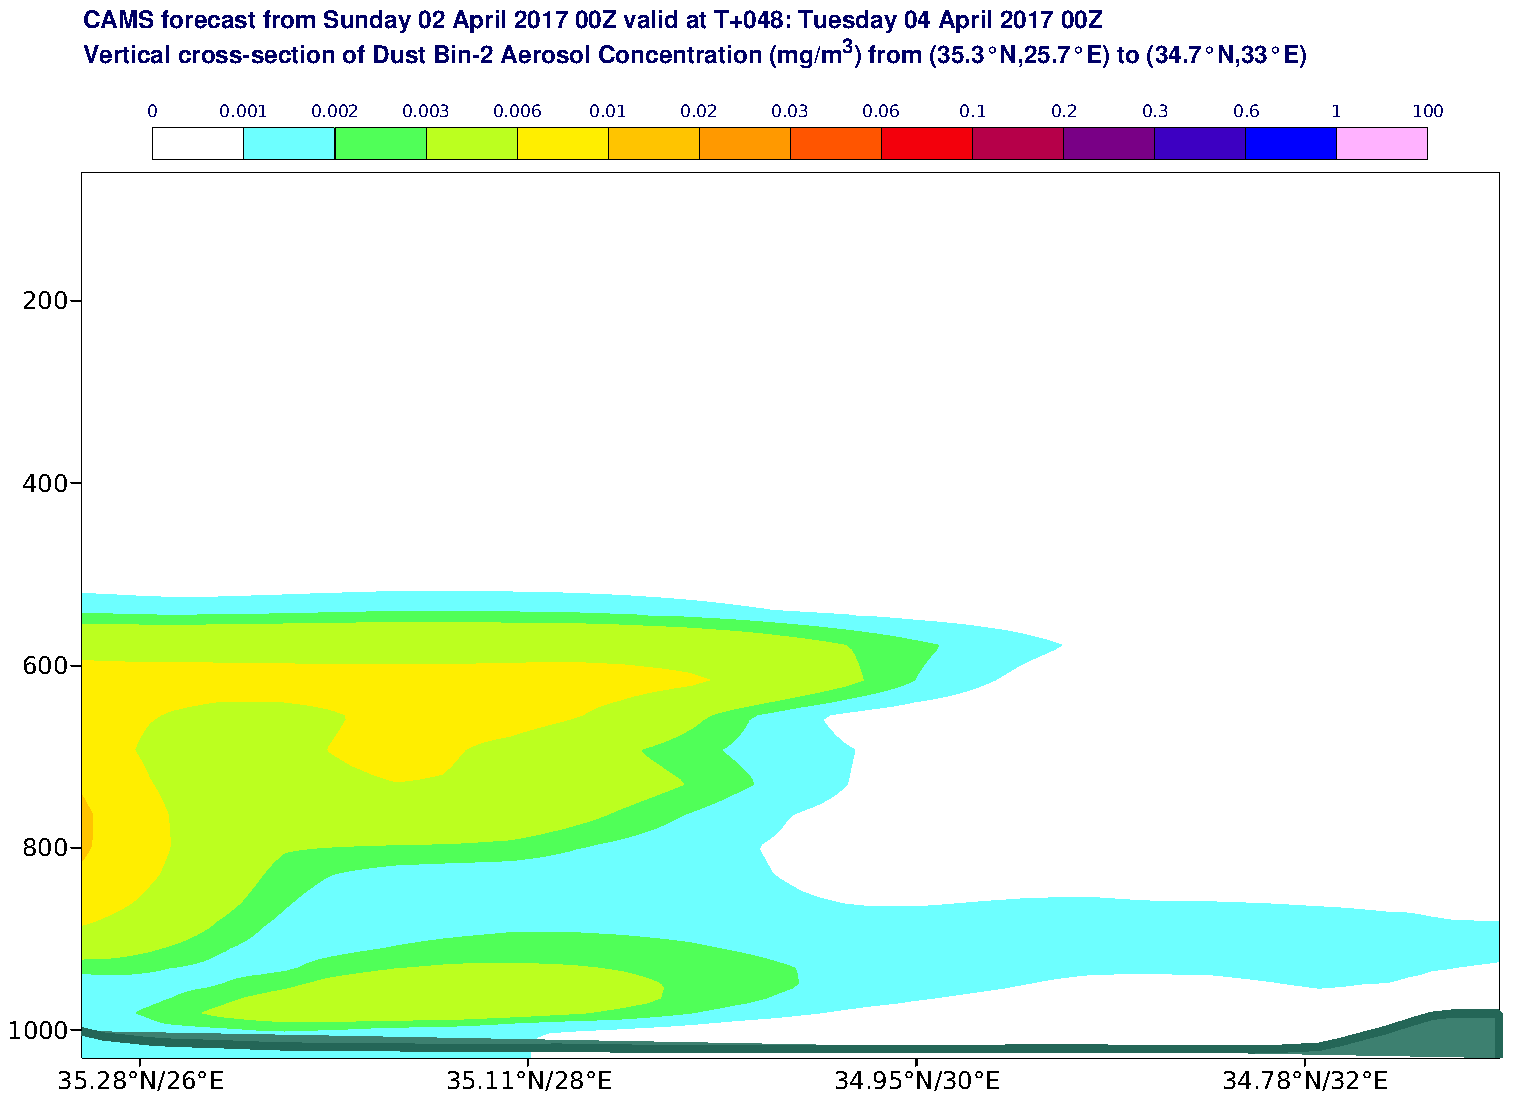 Vertical cross-section of Dust Bin-2 Aerosol Concentration (mg/m3) valid at T48 - 2017-04-04 00:00